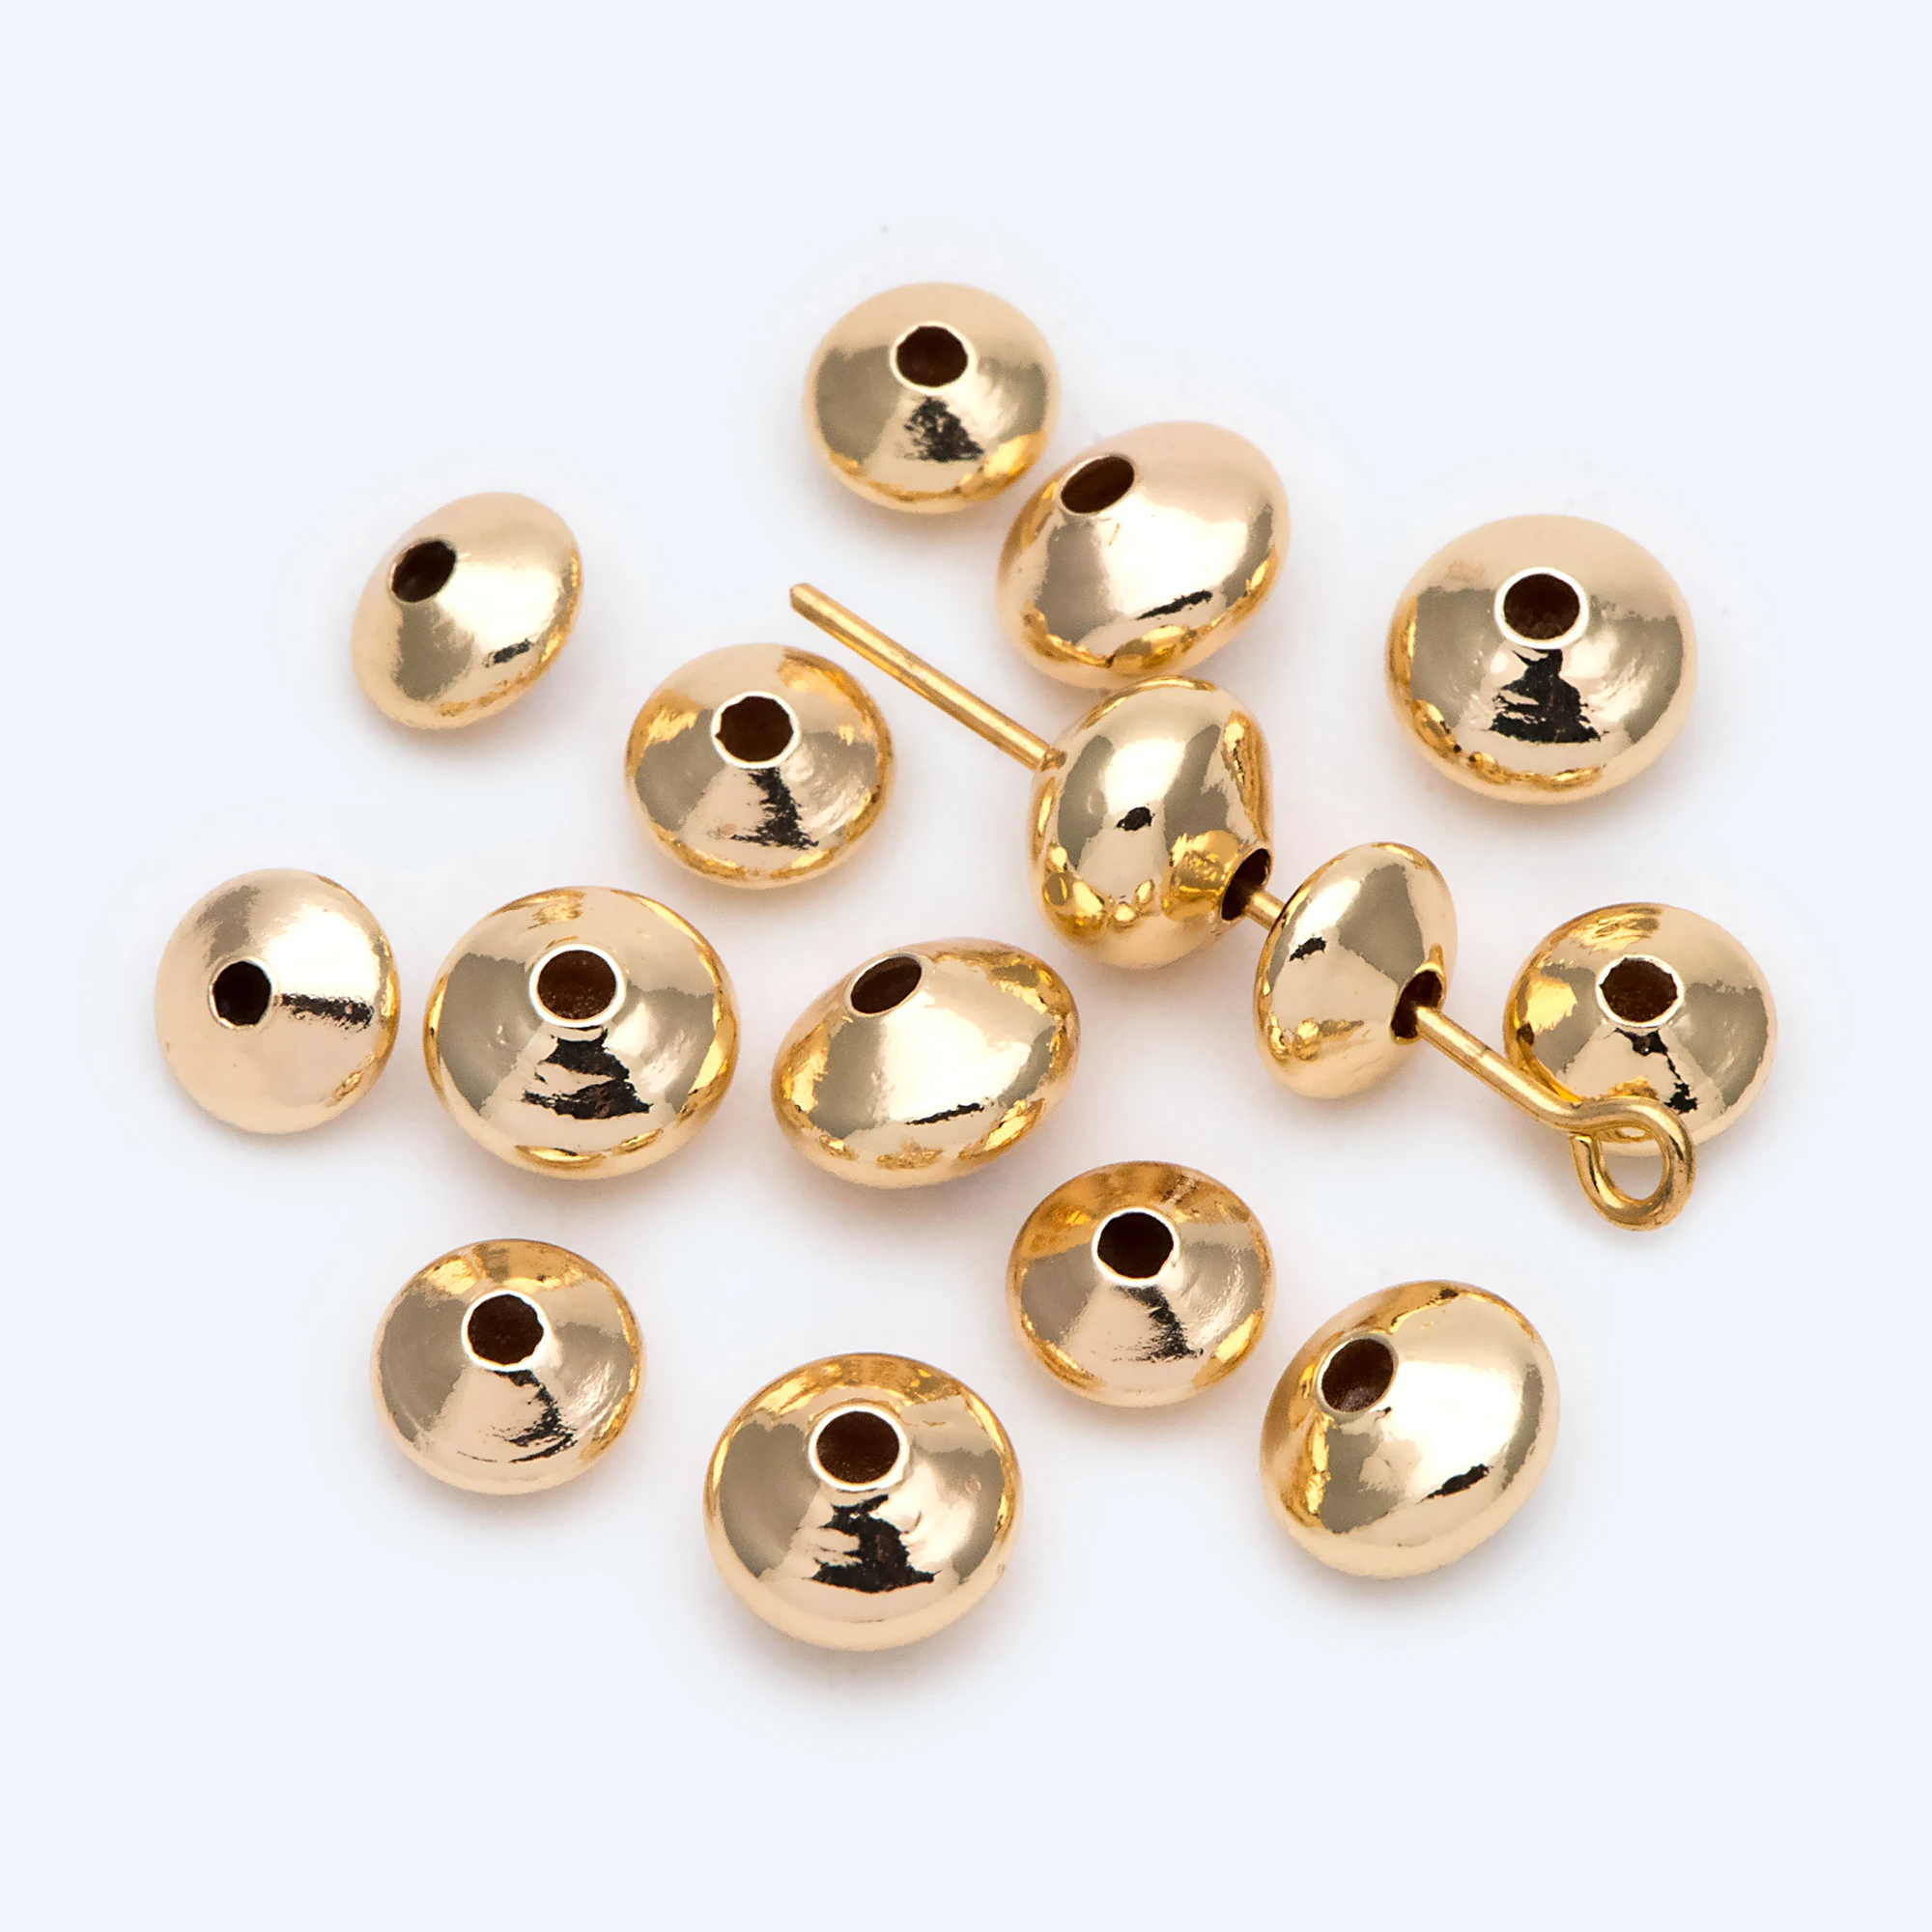 

20pcs Rondelle Beads, Gold Plated Brass Spacers 6 / 7mm, For Jewelry Making DIY Accessories (GB-2171)